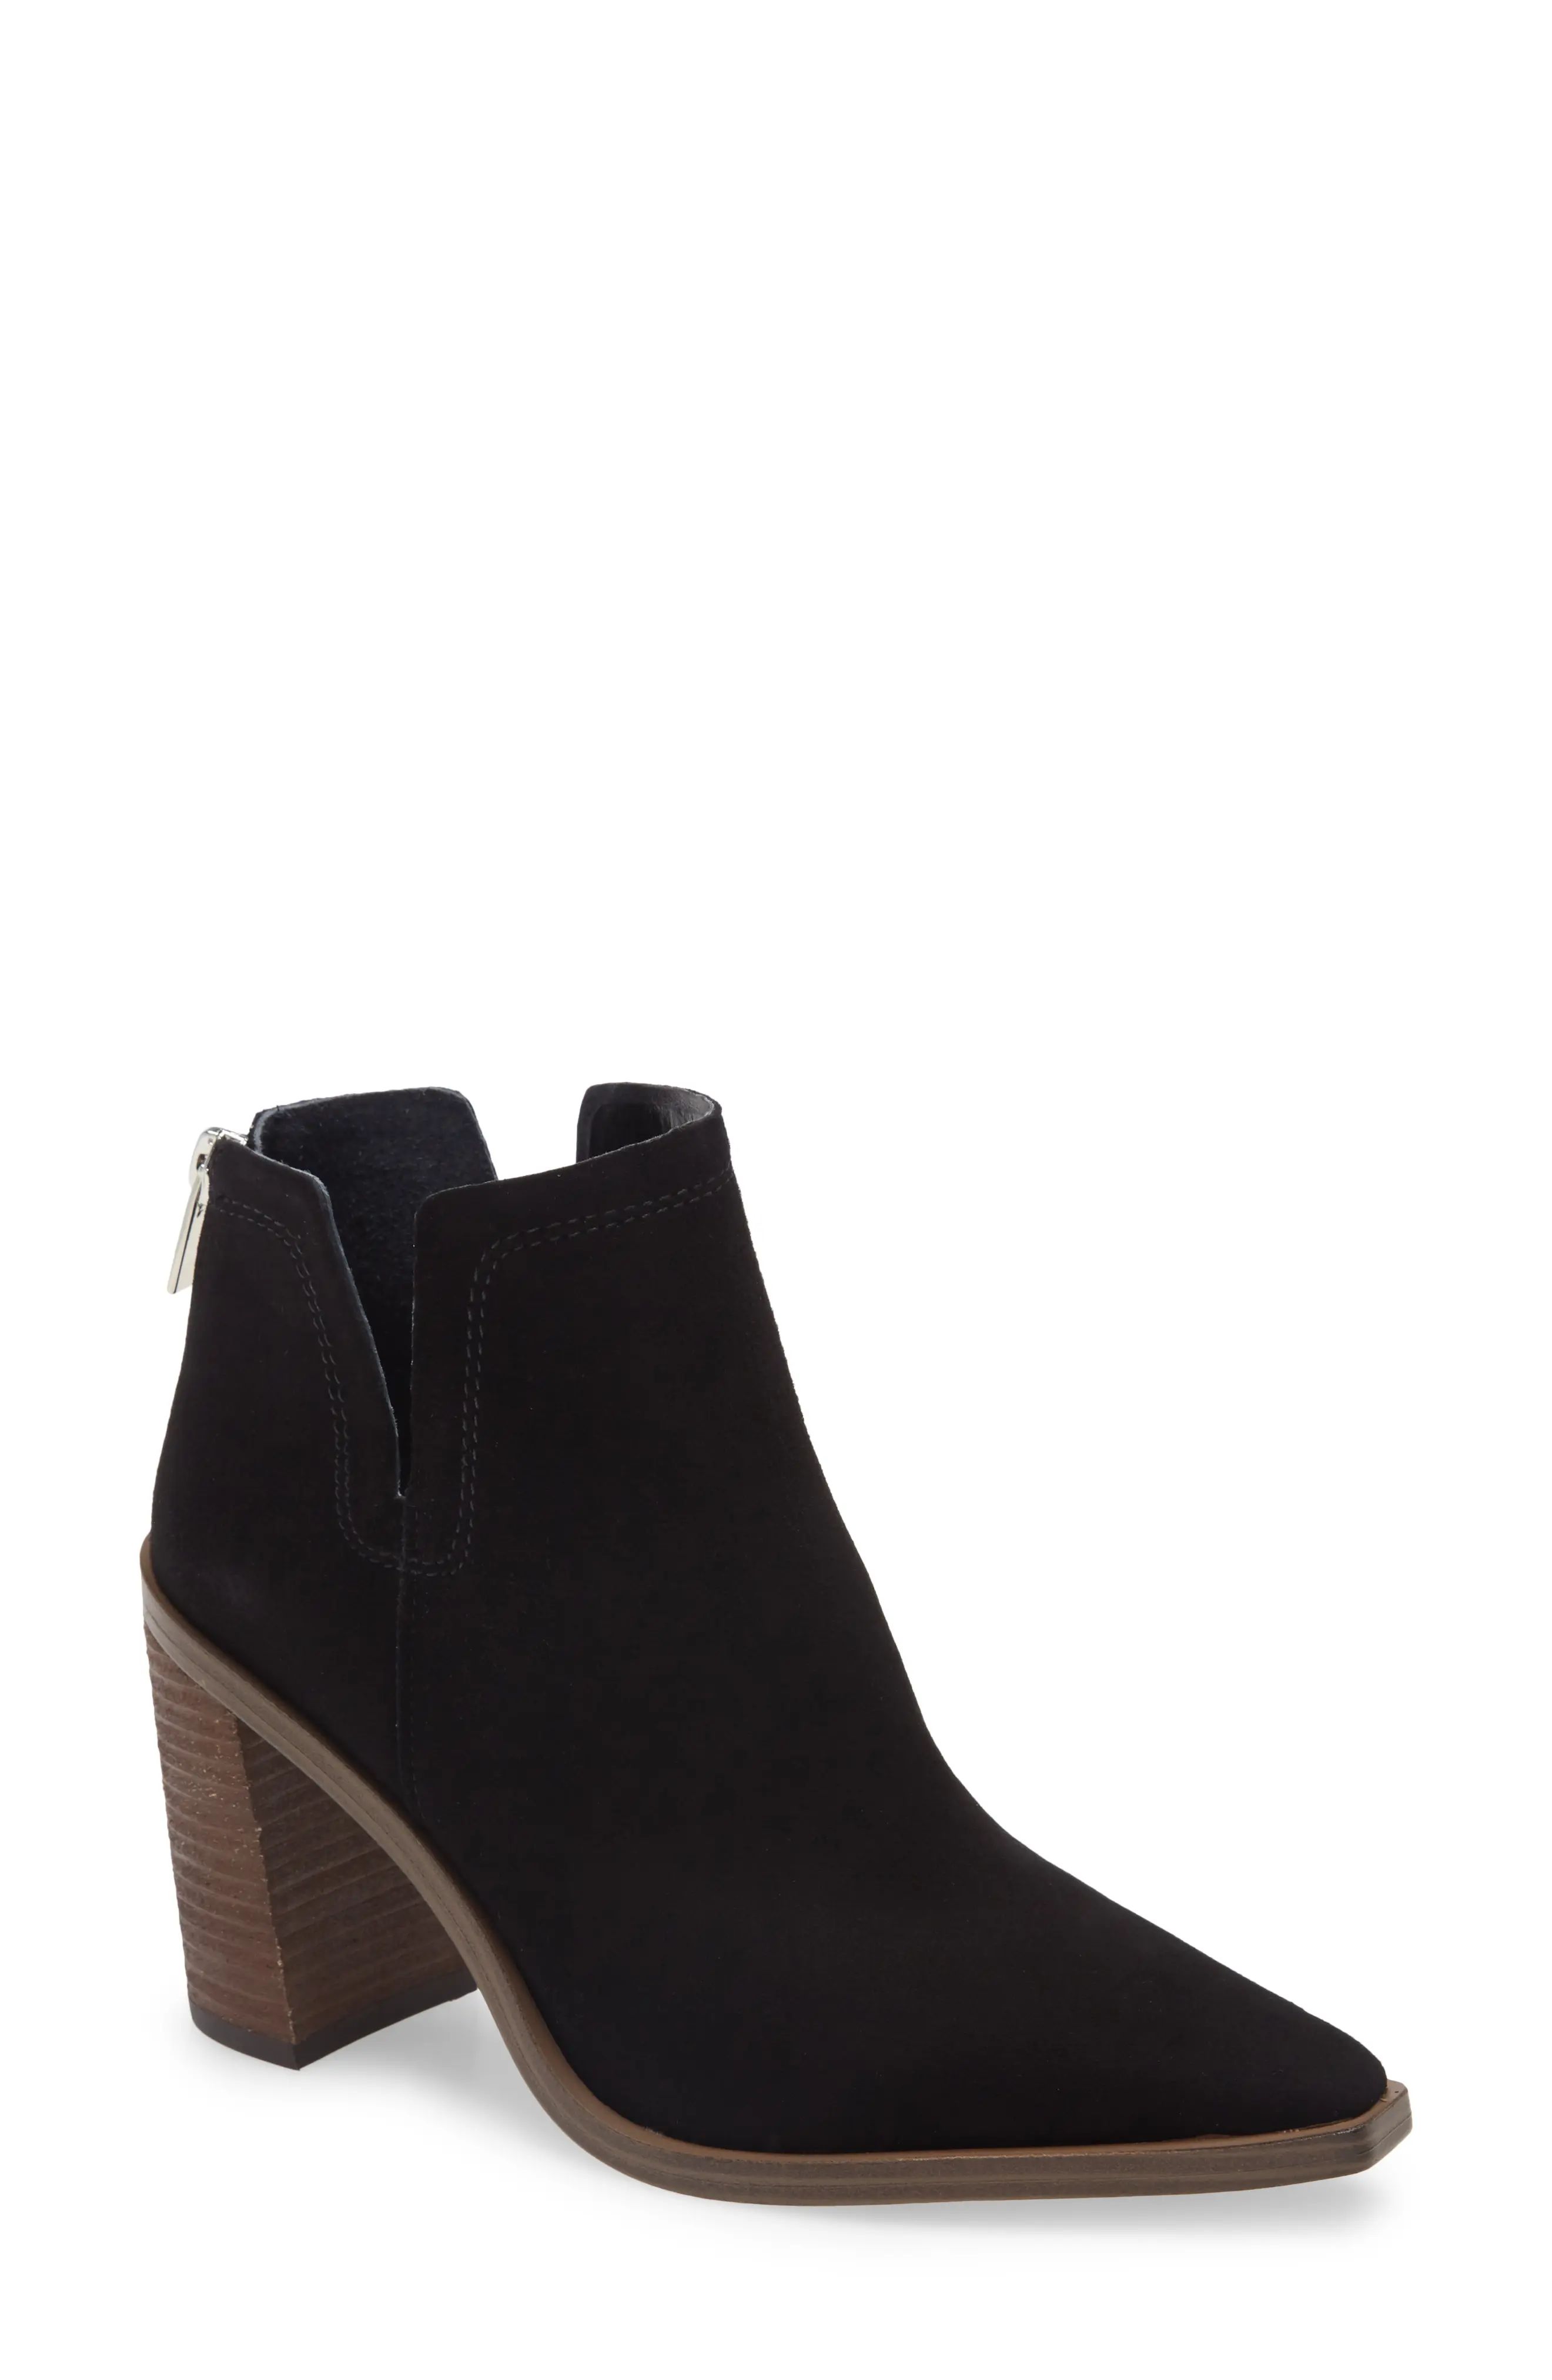 Vince Camuto Welland Bootie, Size 5 in Black Suede at Nordstrom | Nordstrom